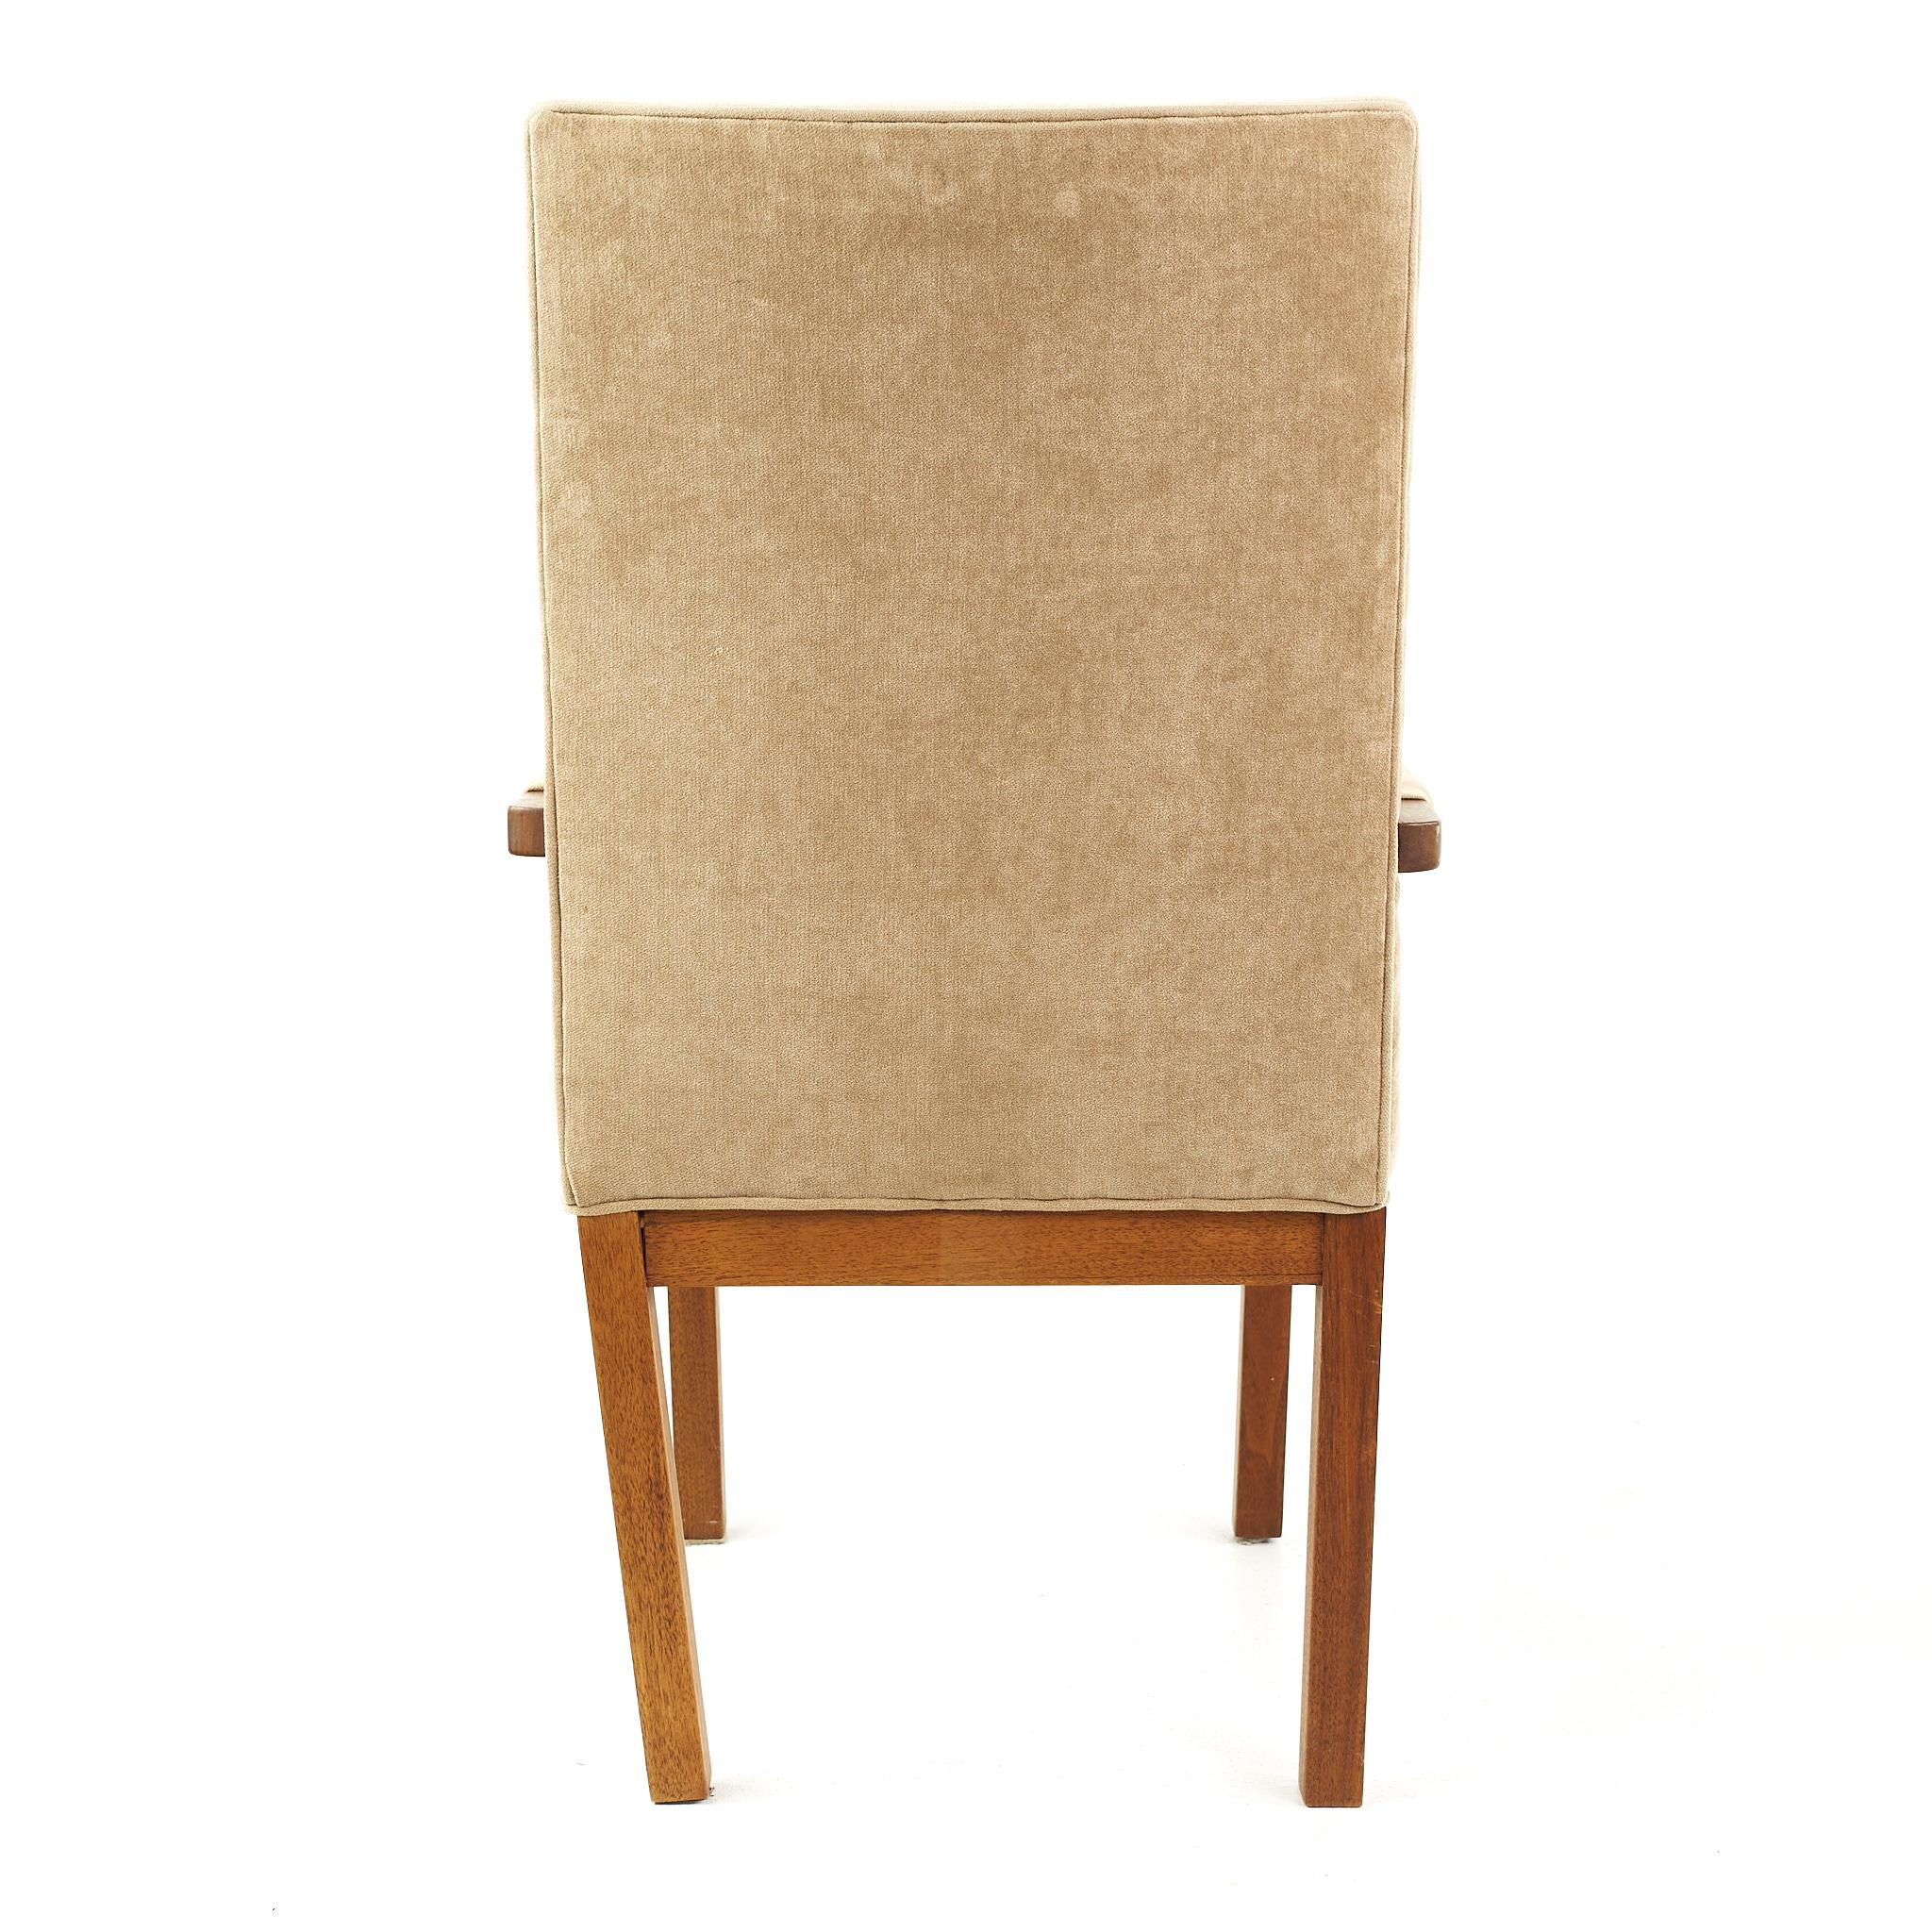 Dillingham Mid Century Walnut Tufted Dining Chairs, Set of 4 For Sale 4